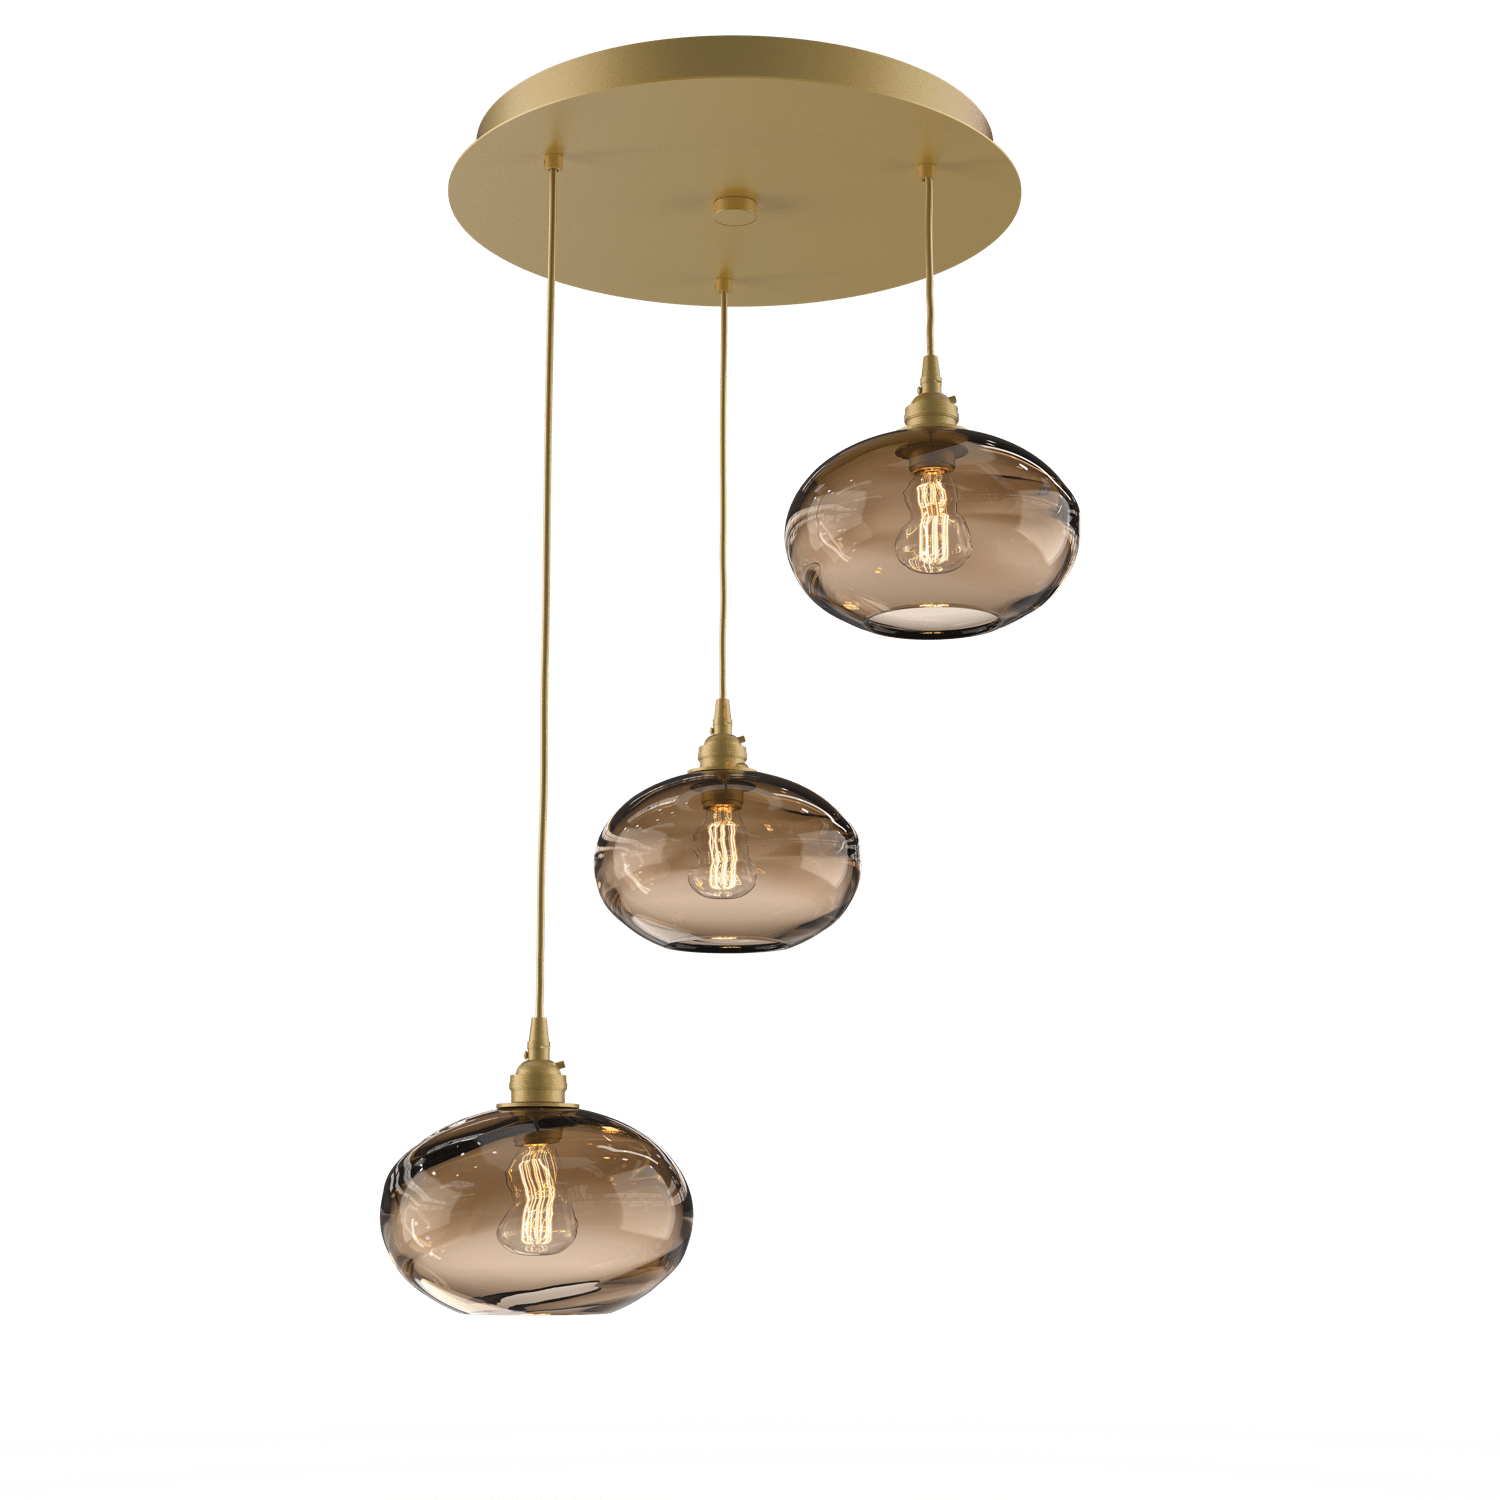 CHB0036-03-GB-OB-Hammerton-Studio-Optic-Blown-Glass-Coppa-3-light-round-pendant-chandelier-with-gilded-brass-finish-and-optic-bronze-blown-glass-shades-and-incandescent-lamping